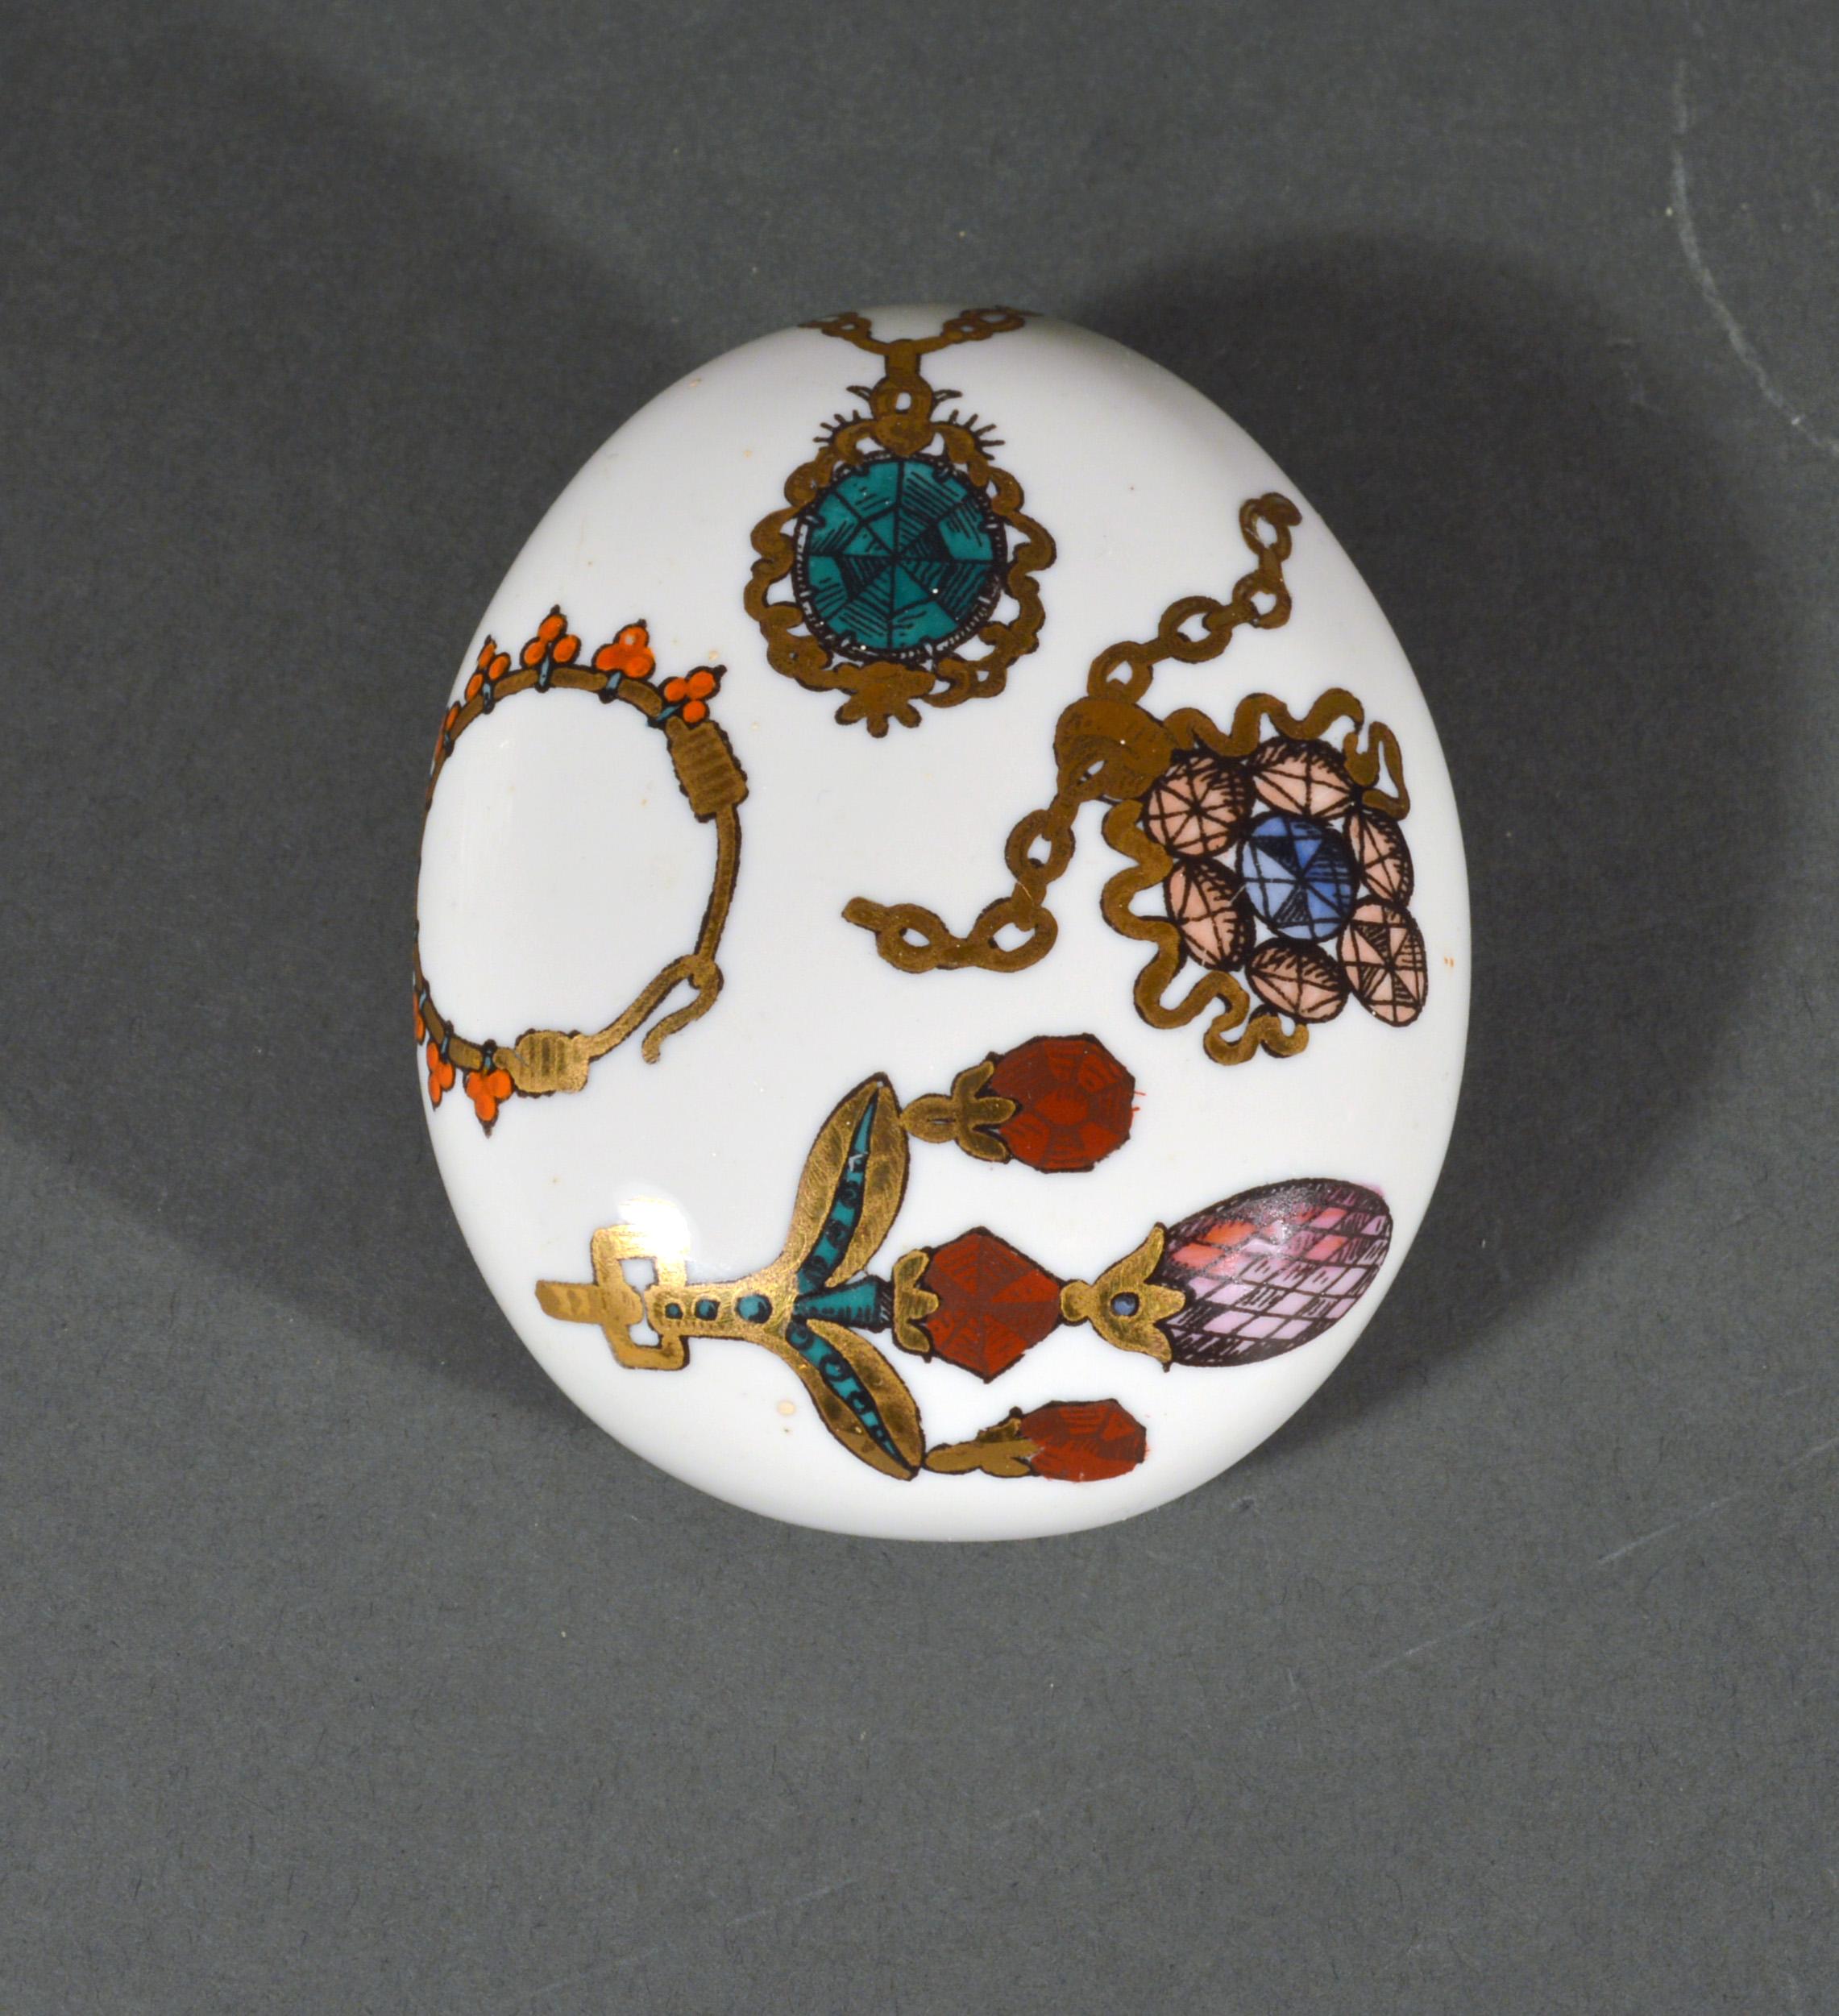 Piero Fornasetti jewelry paperweight,
1950s-1960s.


The egg-shaped paperweight rests upon a triangular-base. The paperweight is covered with images of brightly colored jewelry.

Dimensions: 4 inches long x 3 inches wide x 2 inches